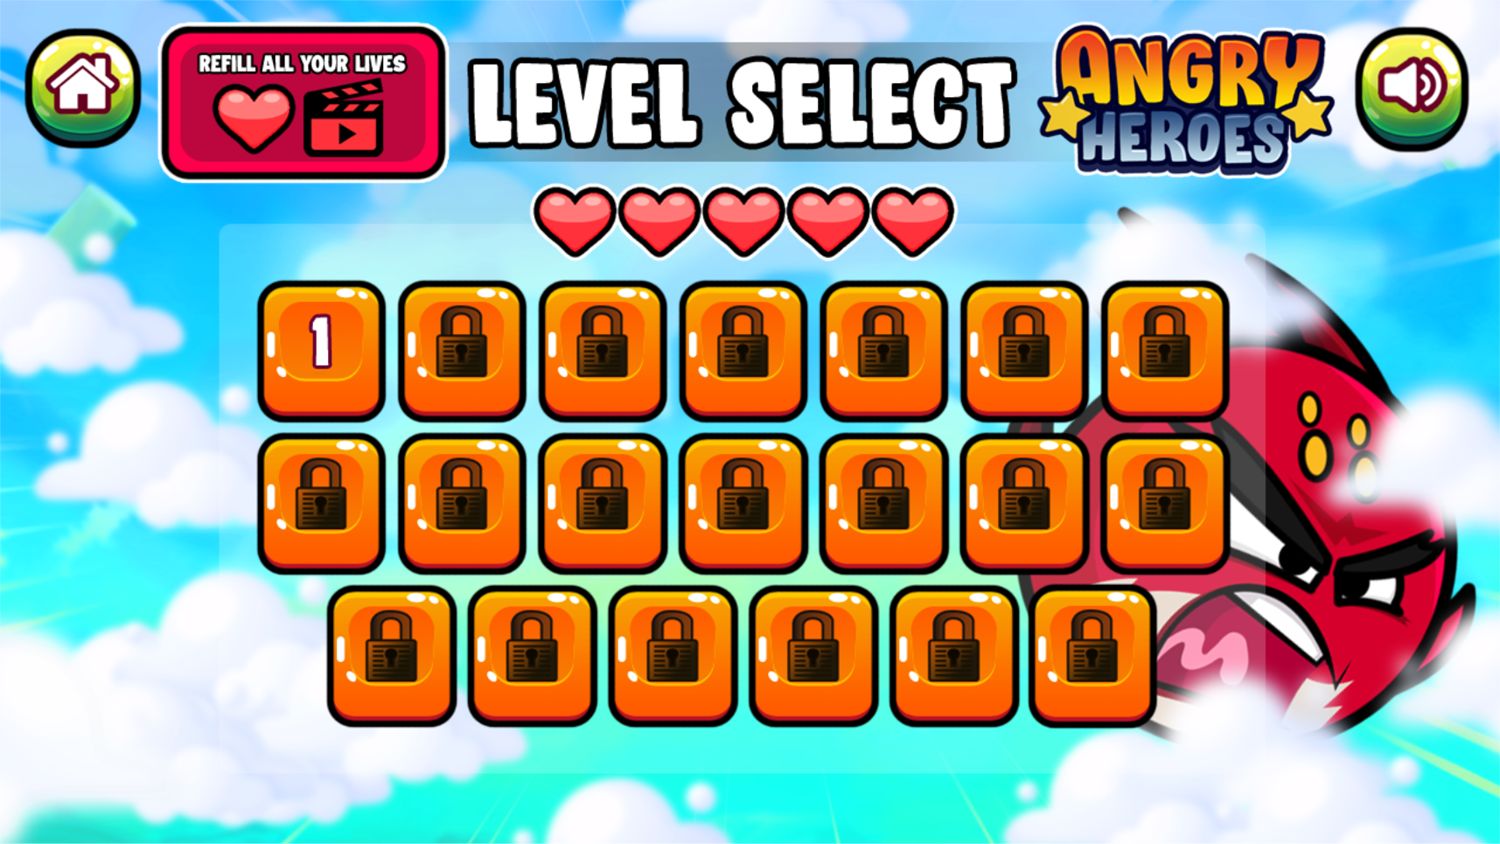 Angry Heroes Game Level Select Screenshot.